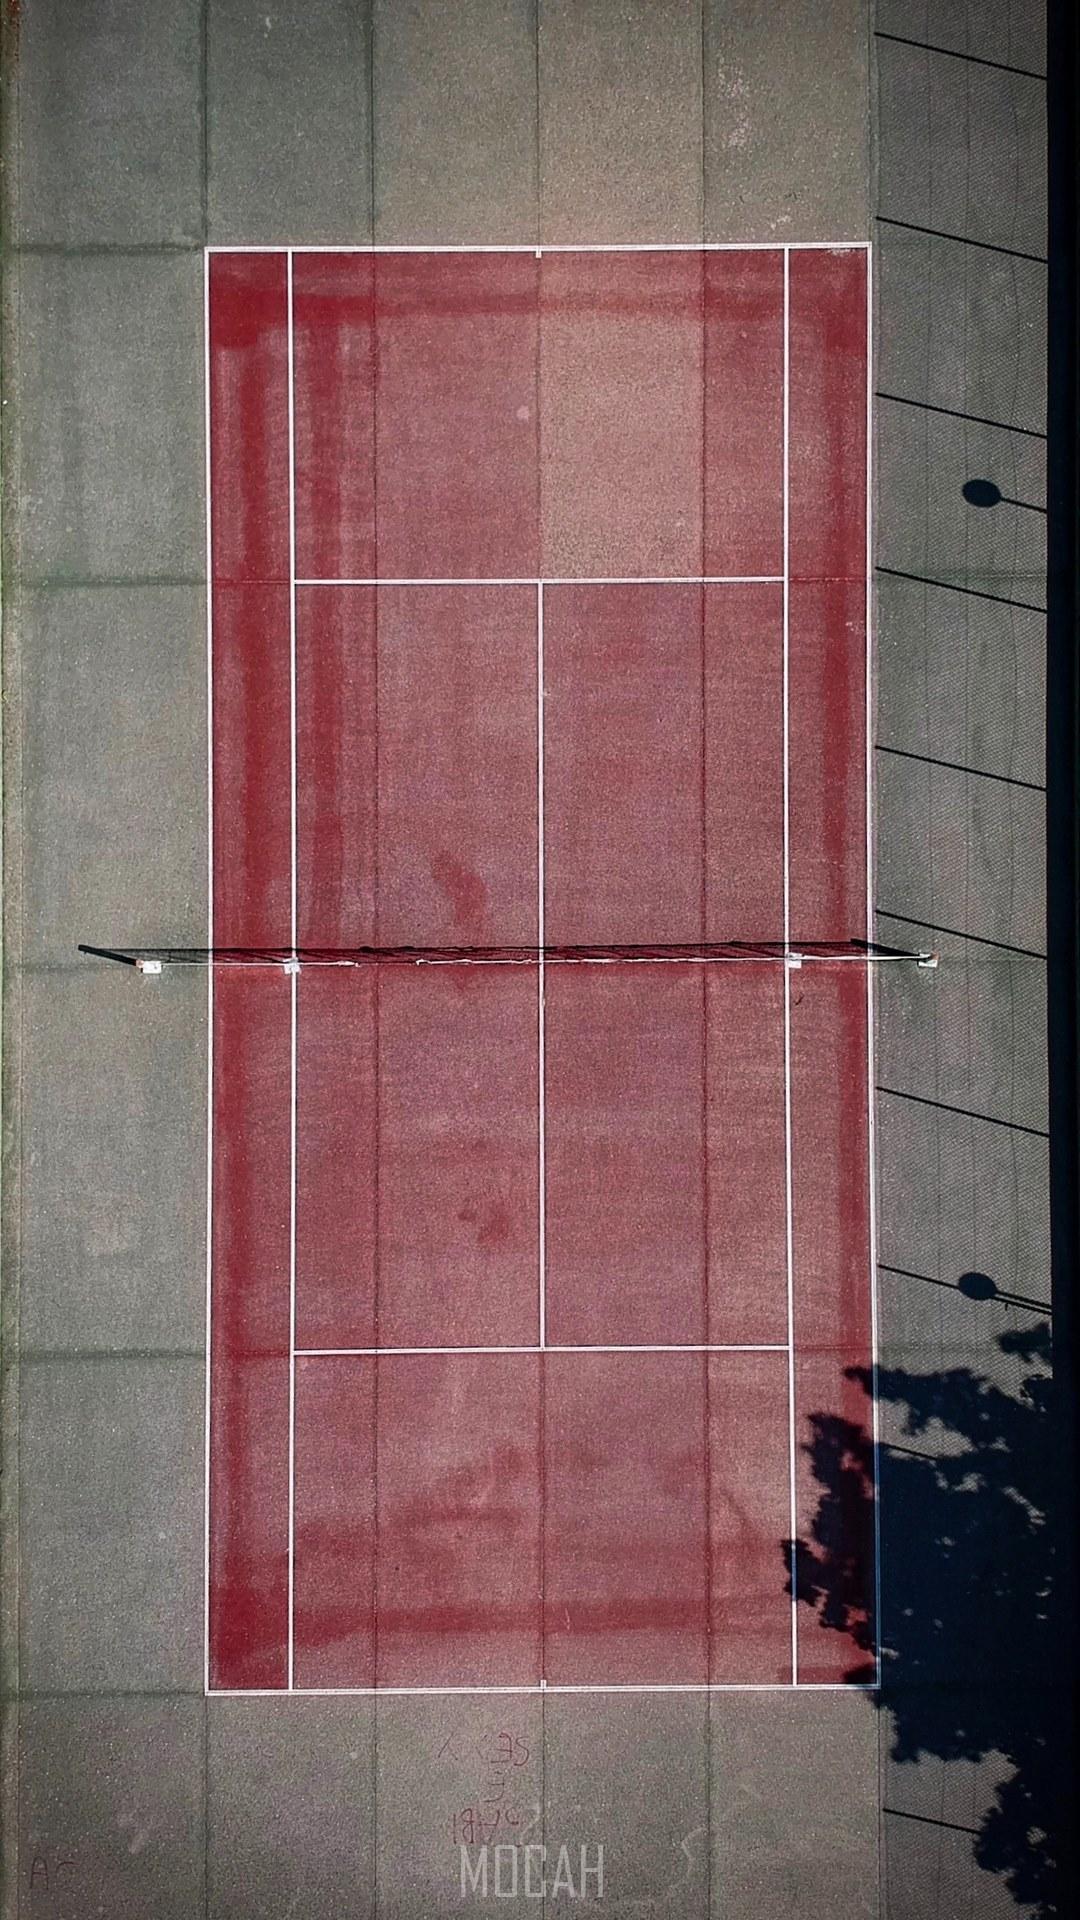 HD wallpaper, 1080X1920, My First Drone Picture, Samsung Galaxy A9 Pro 2016 Hd Download, A Drone Shot Of A Red Tennis Court